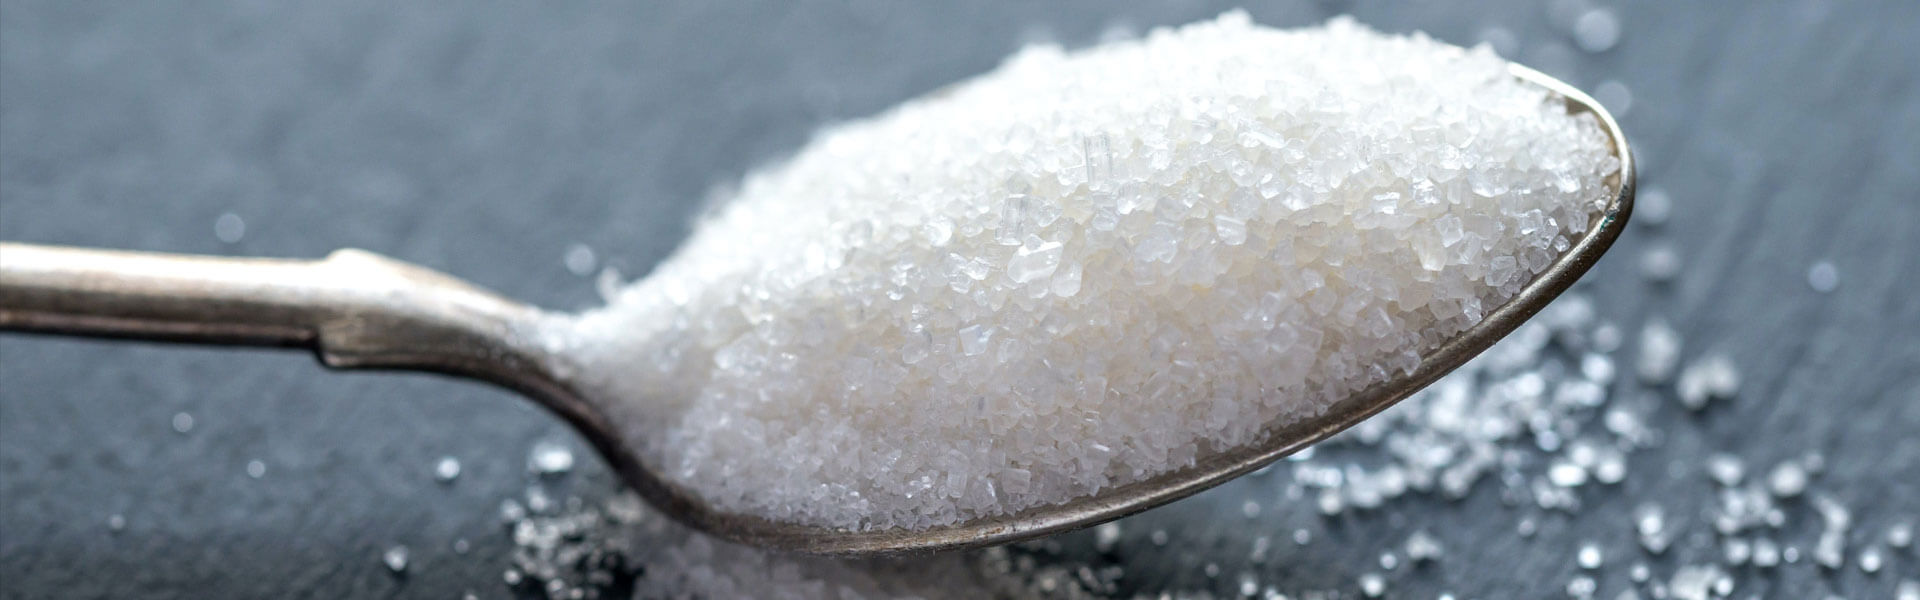 How Does Sugar Affect Your Dental Health?